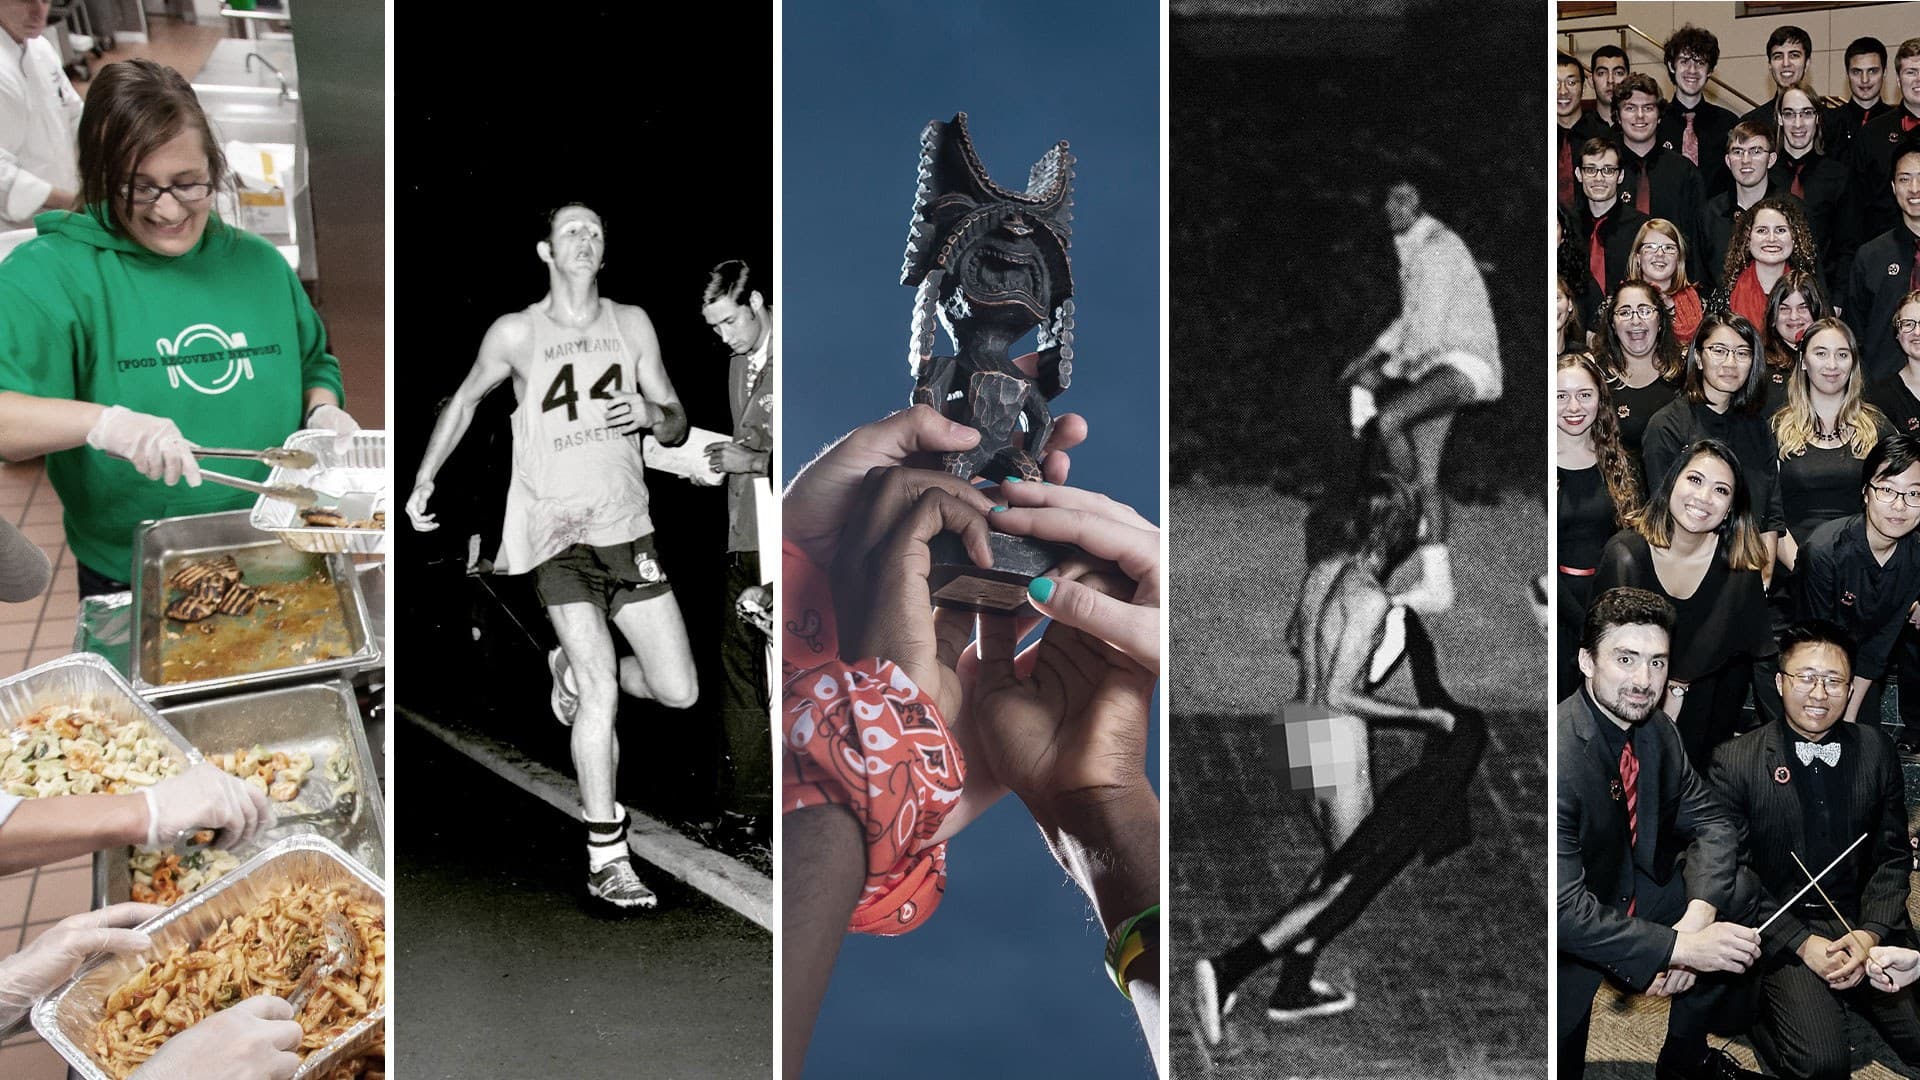 collage of student packaging food, basketball player running on the track, hands holding up immunity idol statue, streakers on campus, and orchestra members